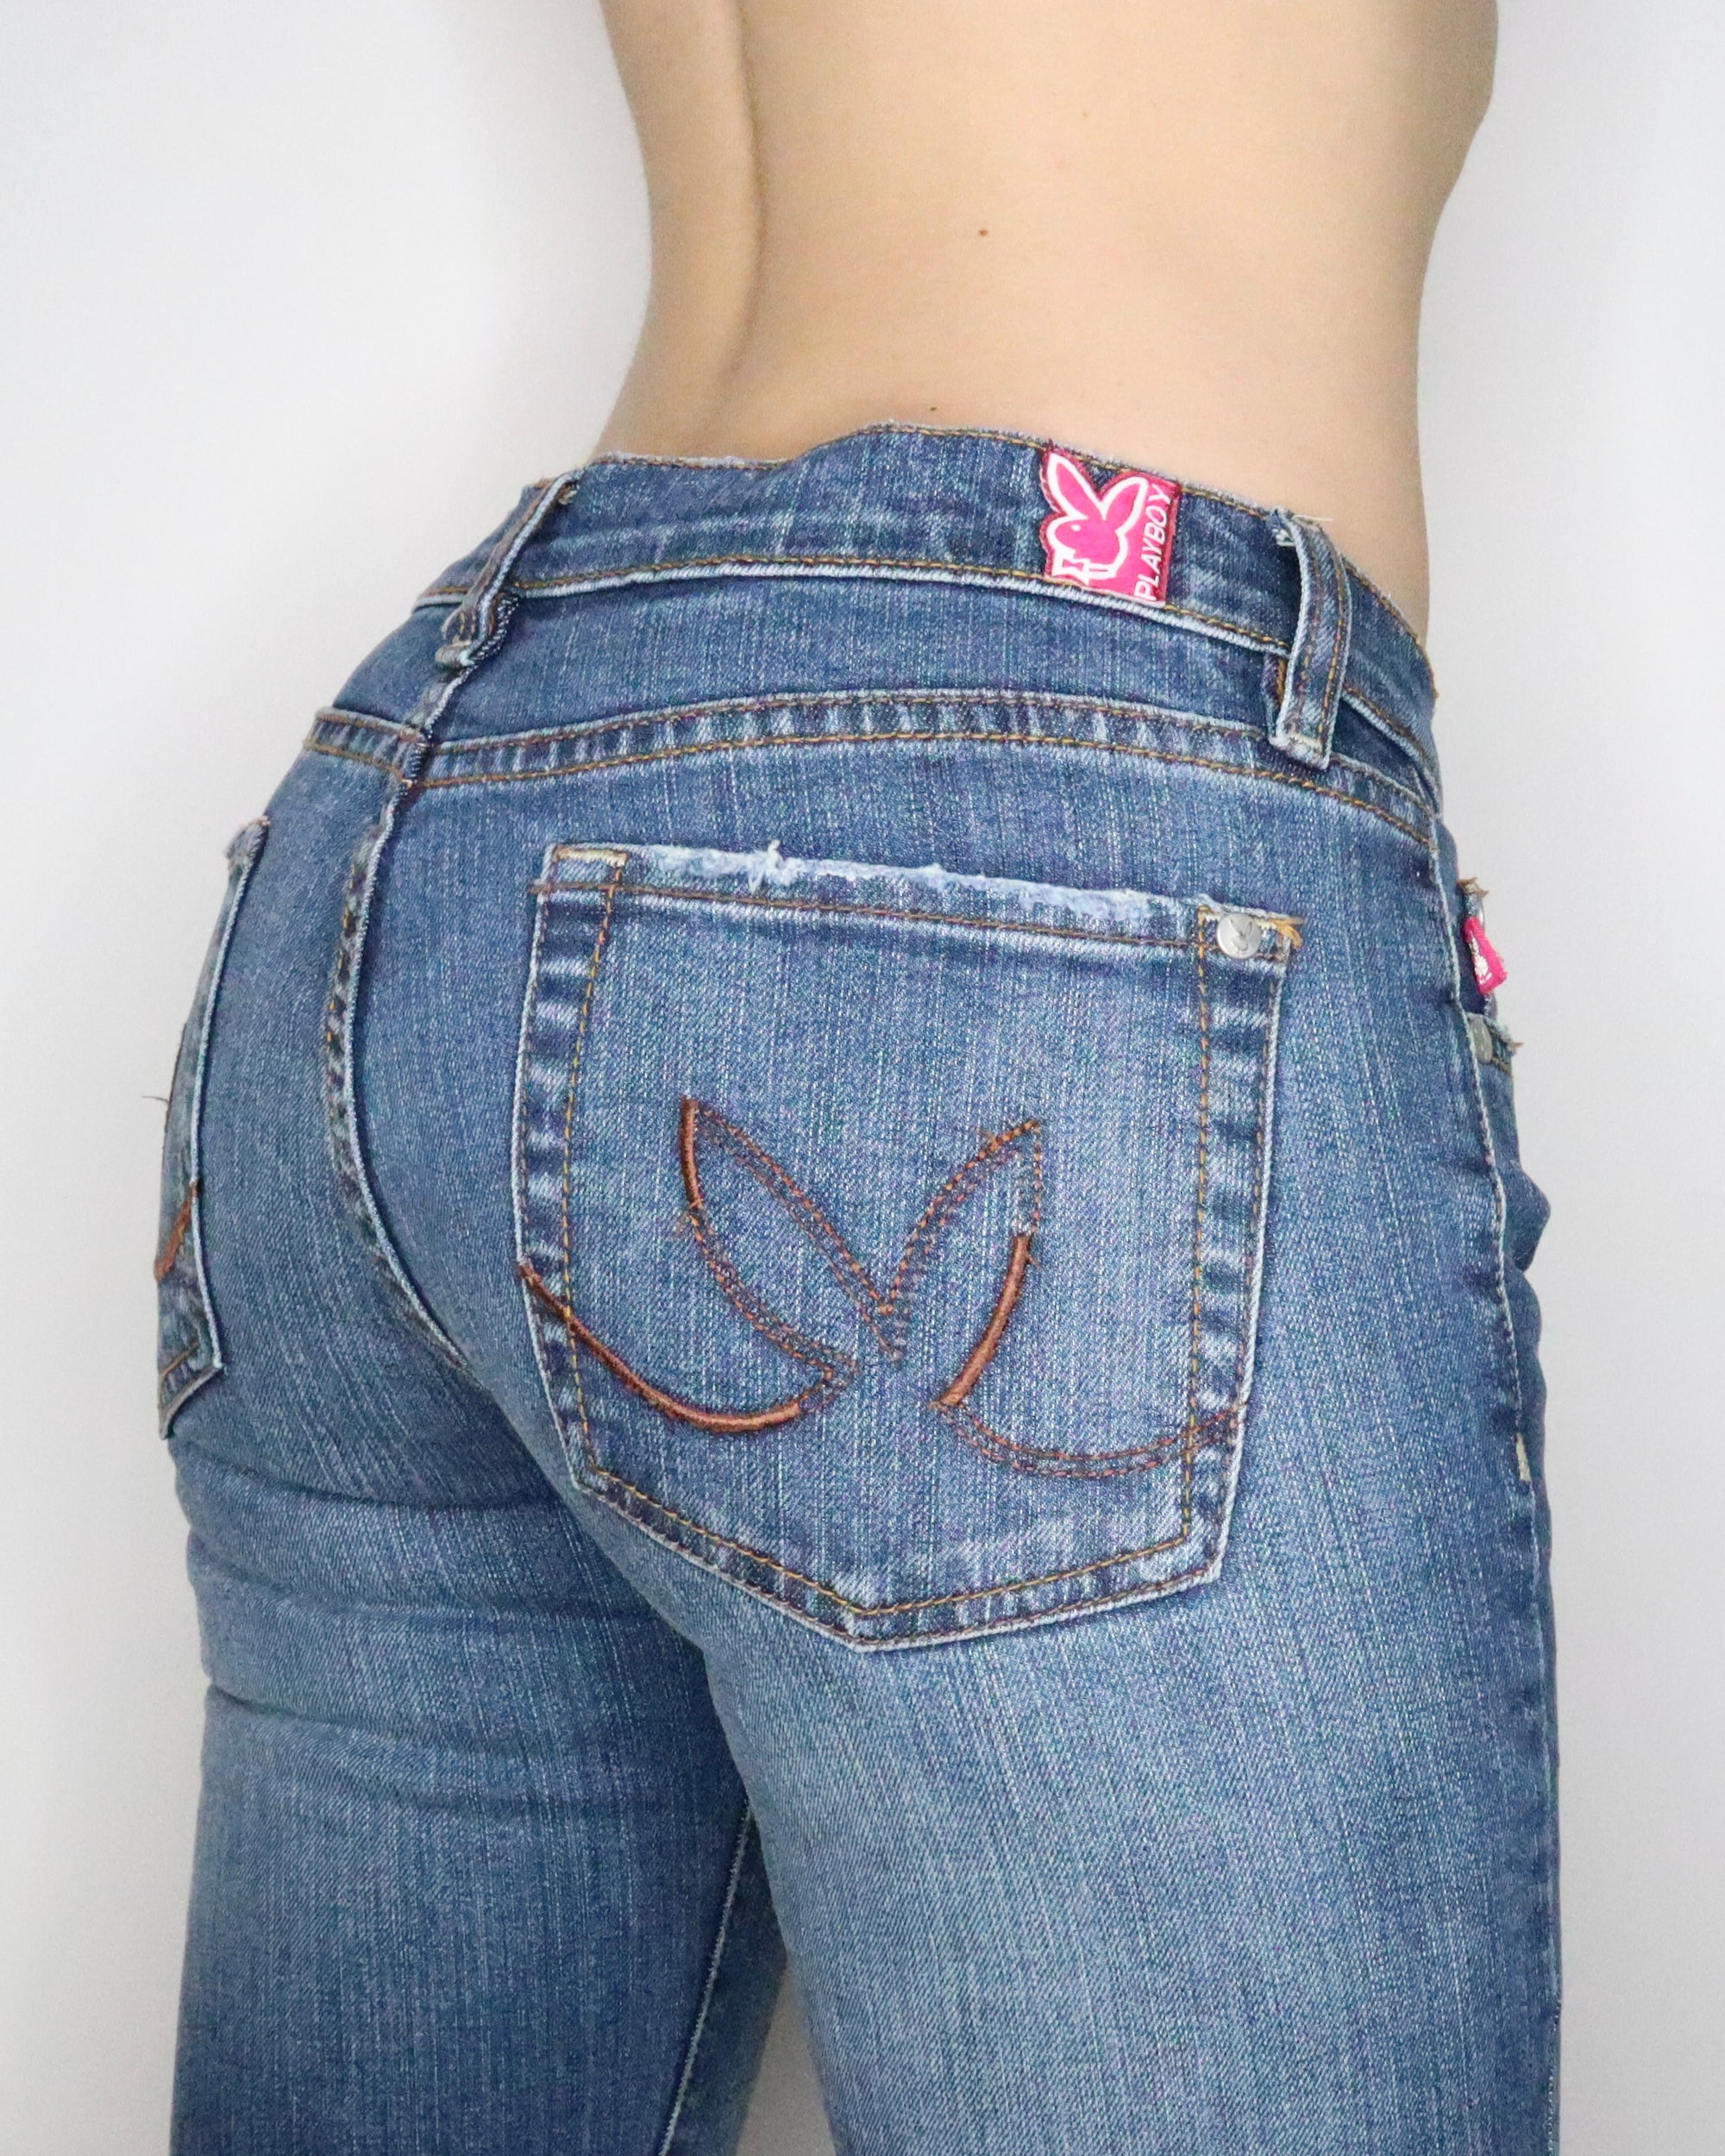 Playboy Flare Jeans (Small) 